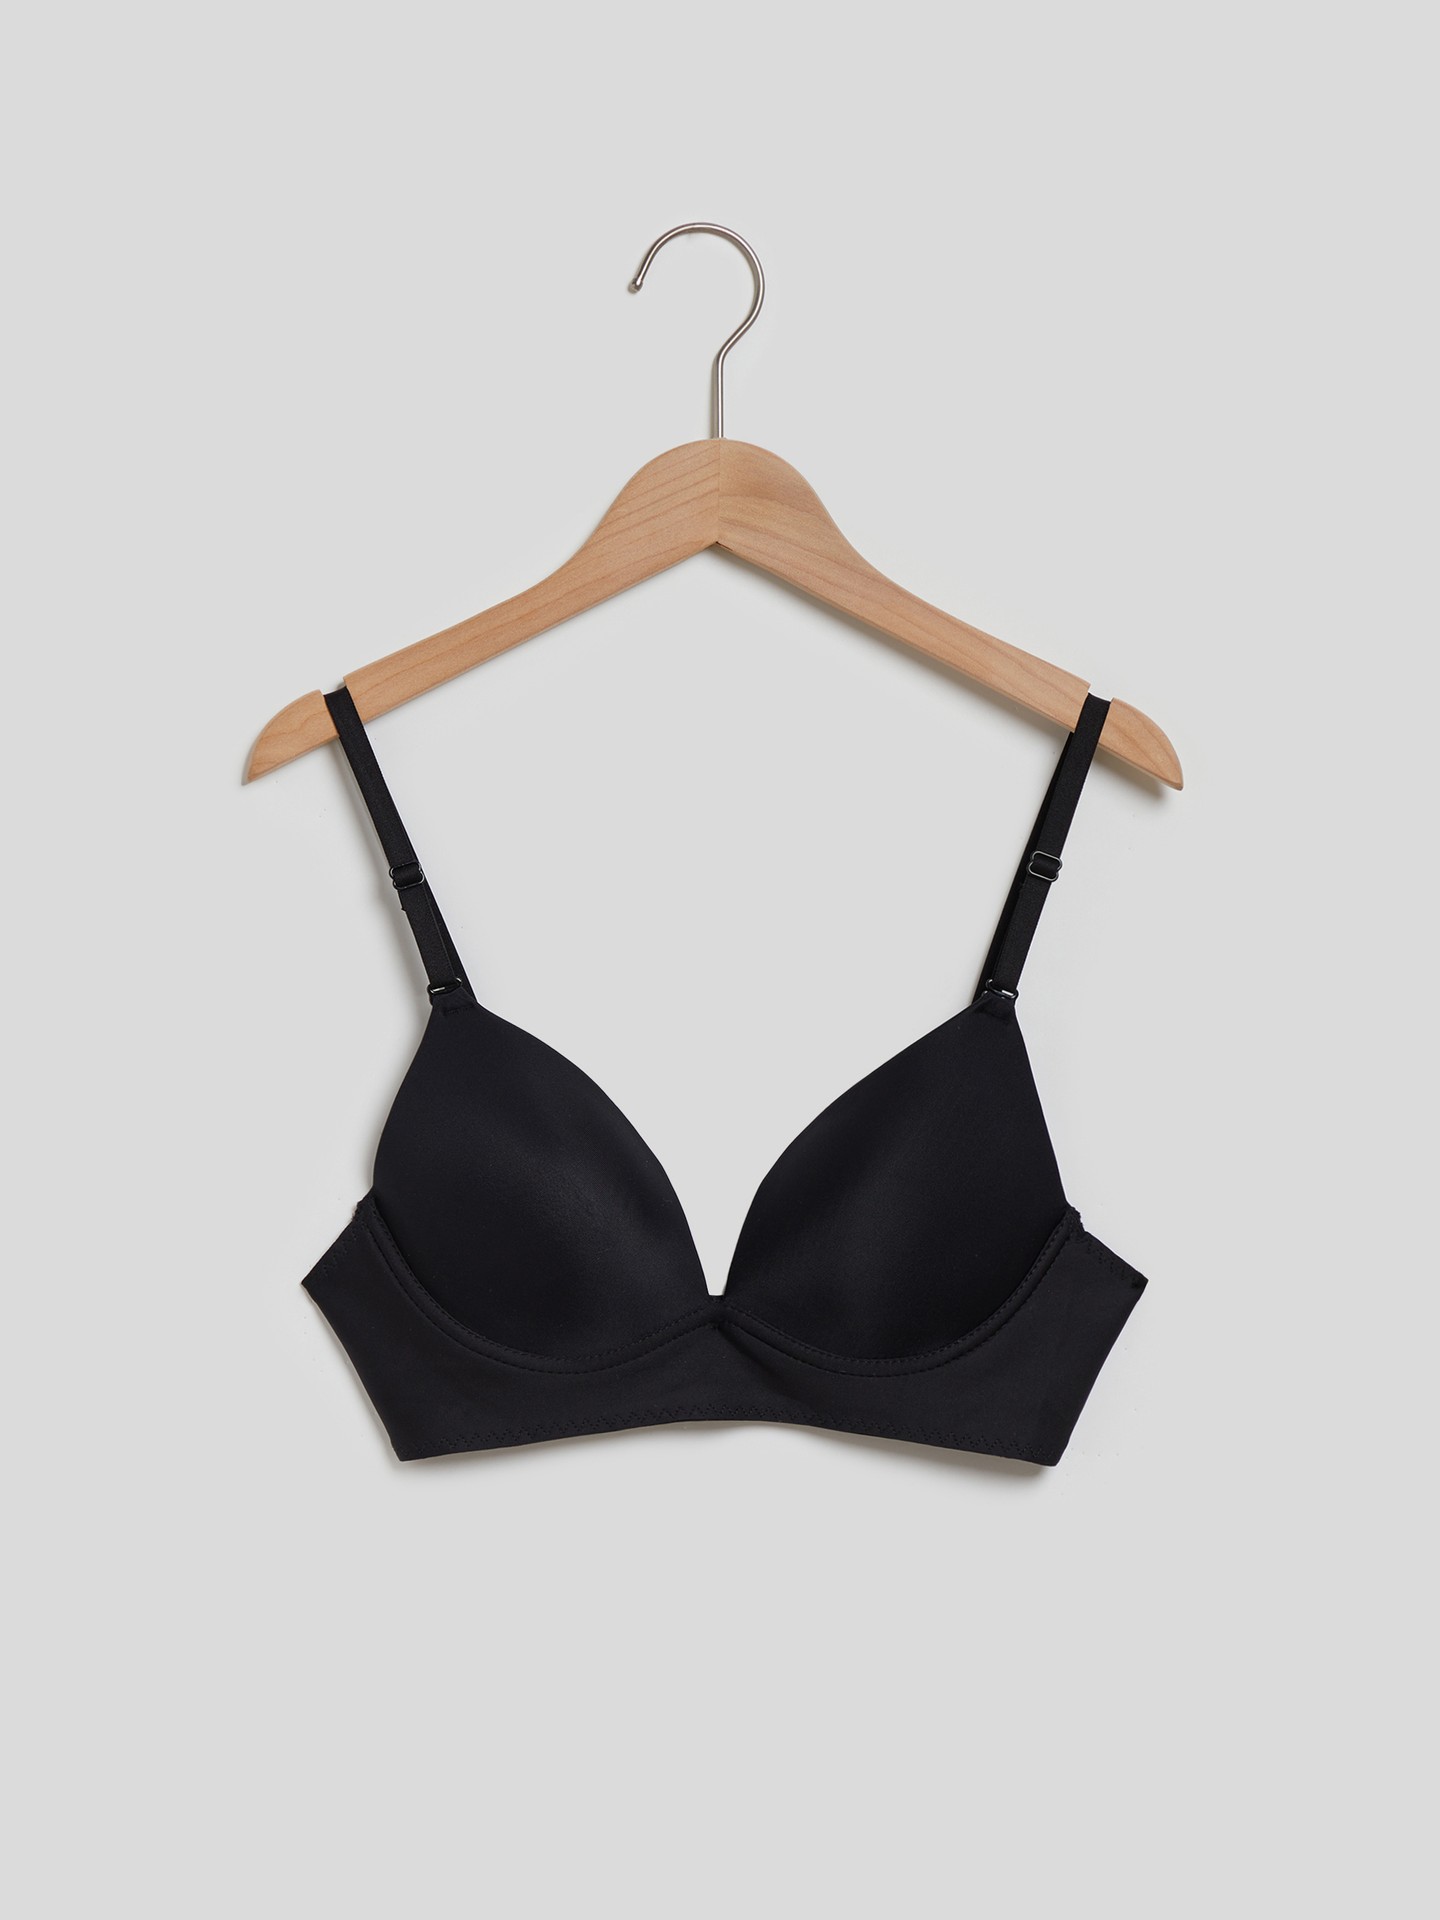 Push Up Lady Cotton Bras(BOBBY PATTERN), Black, Plain at Rs 32/piece in  Ahmedabad